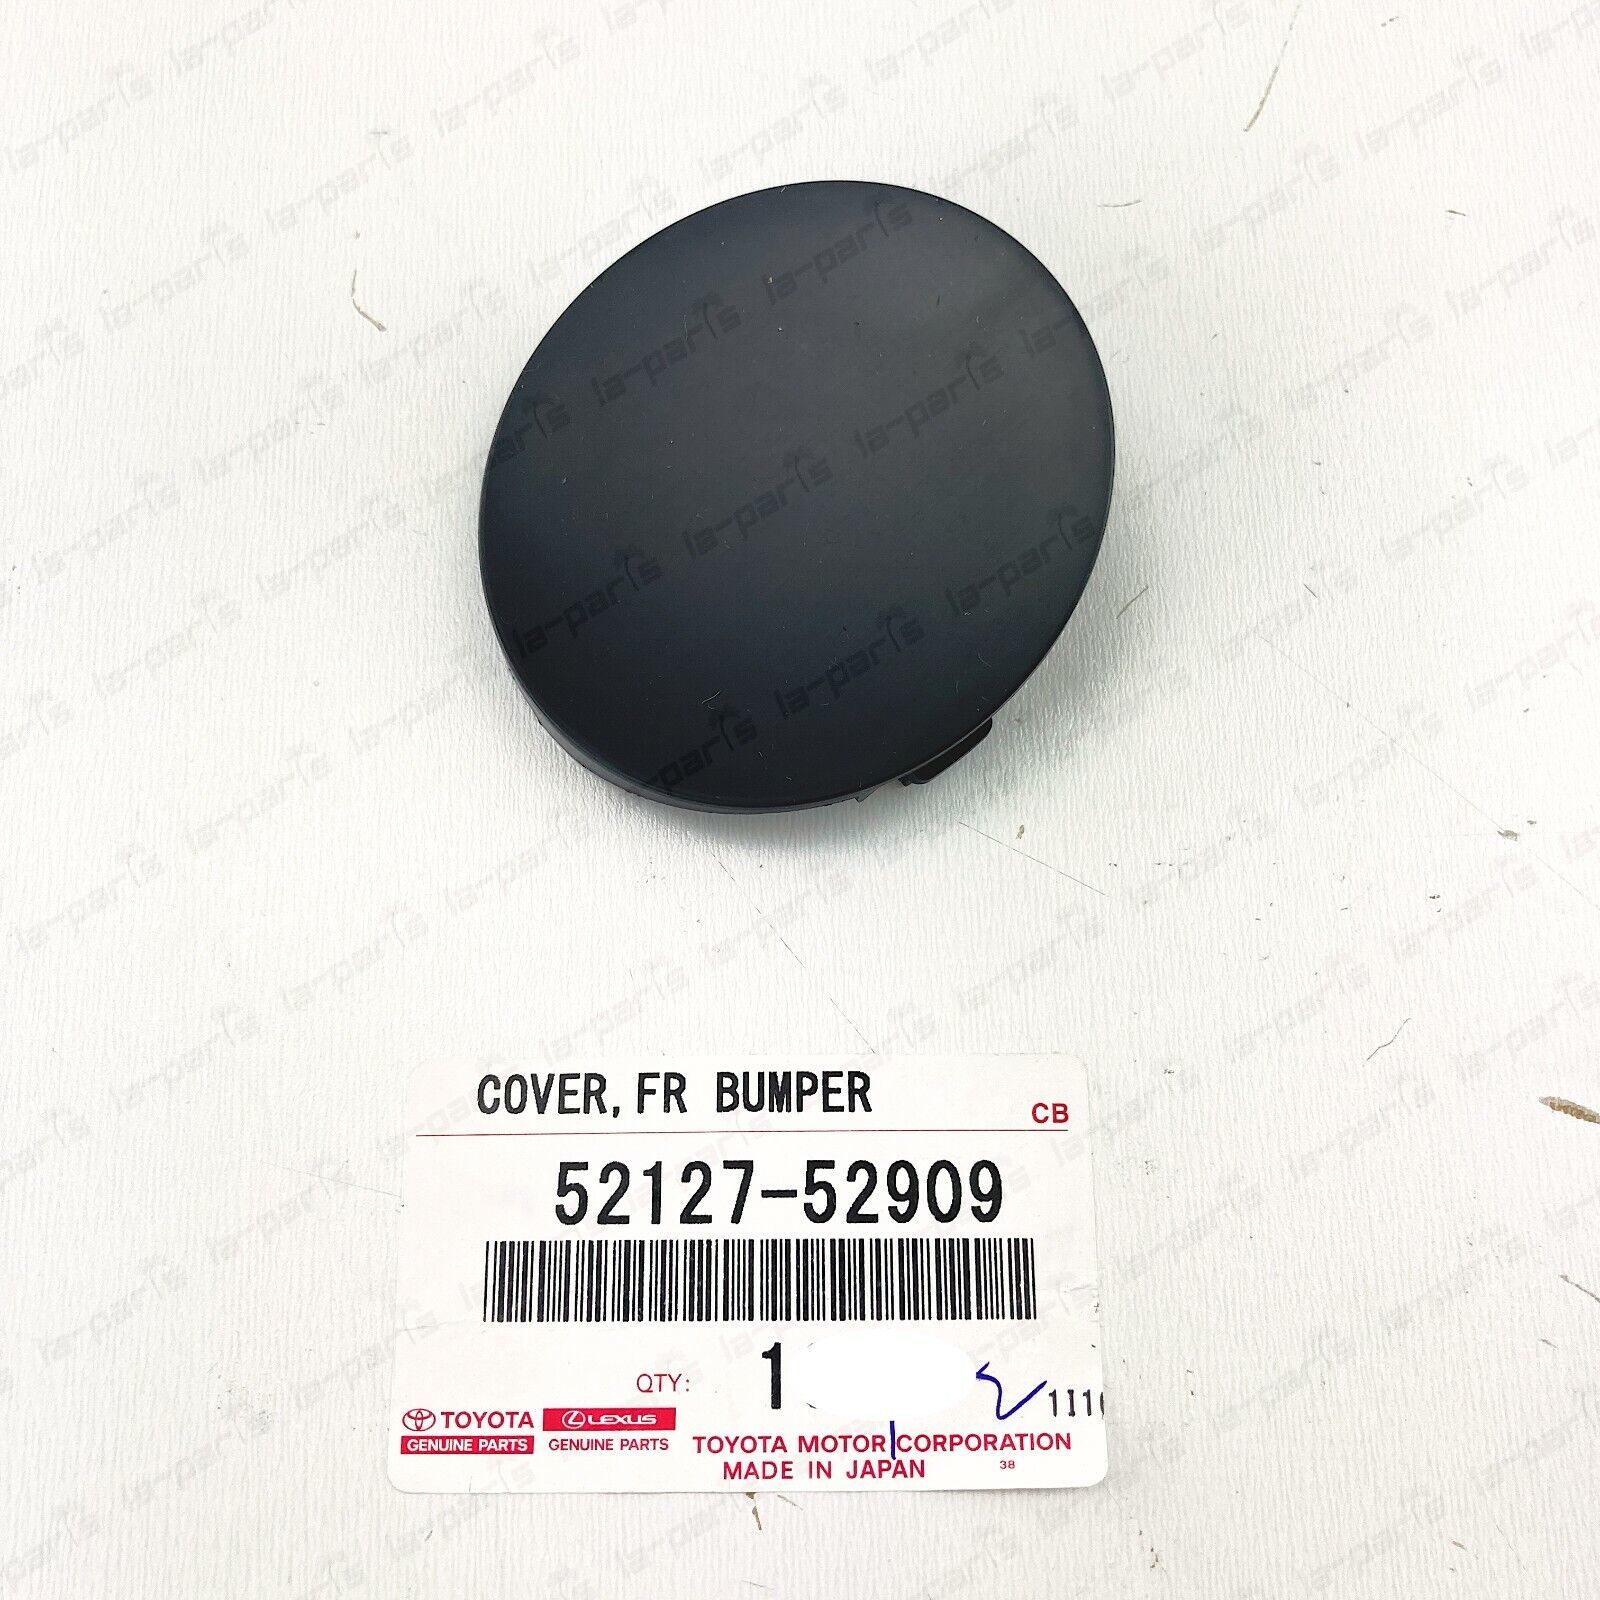 Primary image for NEW GENUINE TOYOTA YARIS FRONT BUMPER TOW HOOK HOLE CAP COVER 52127-52909